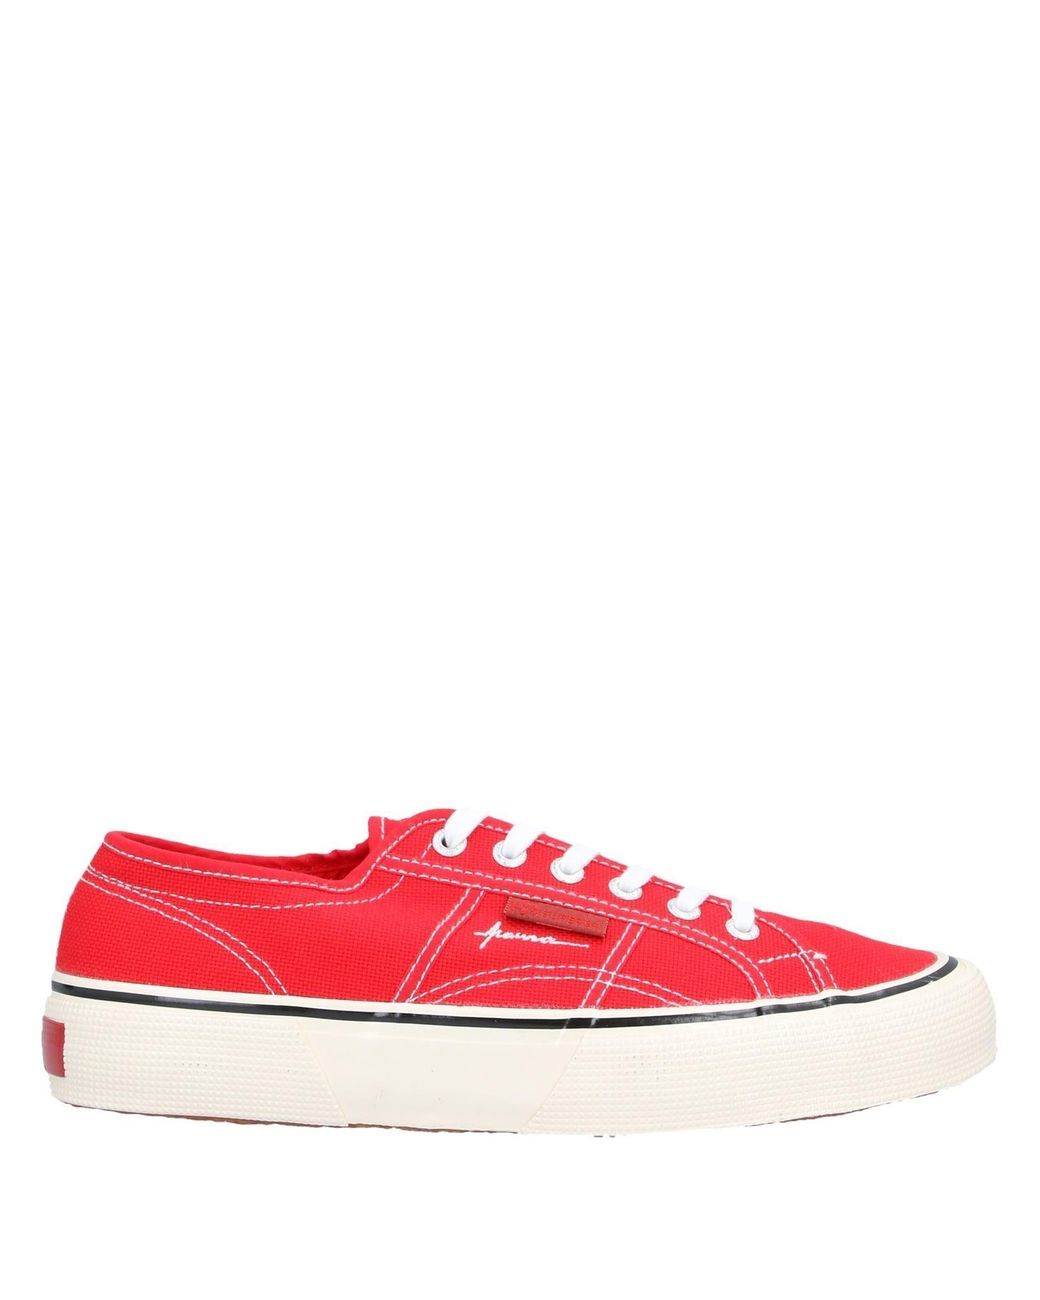 Superga Canvas Low-tops & Sneakers in Red for Men - Lyst